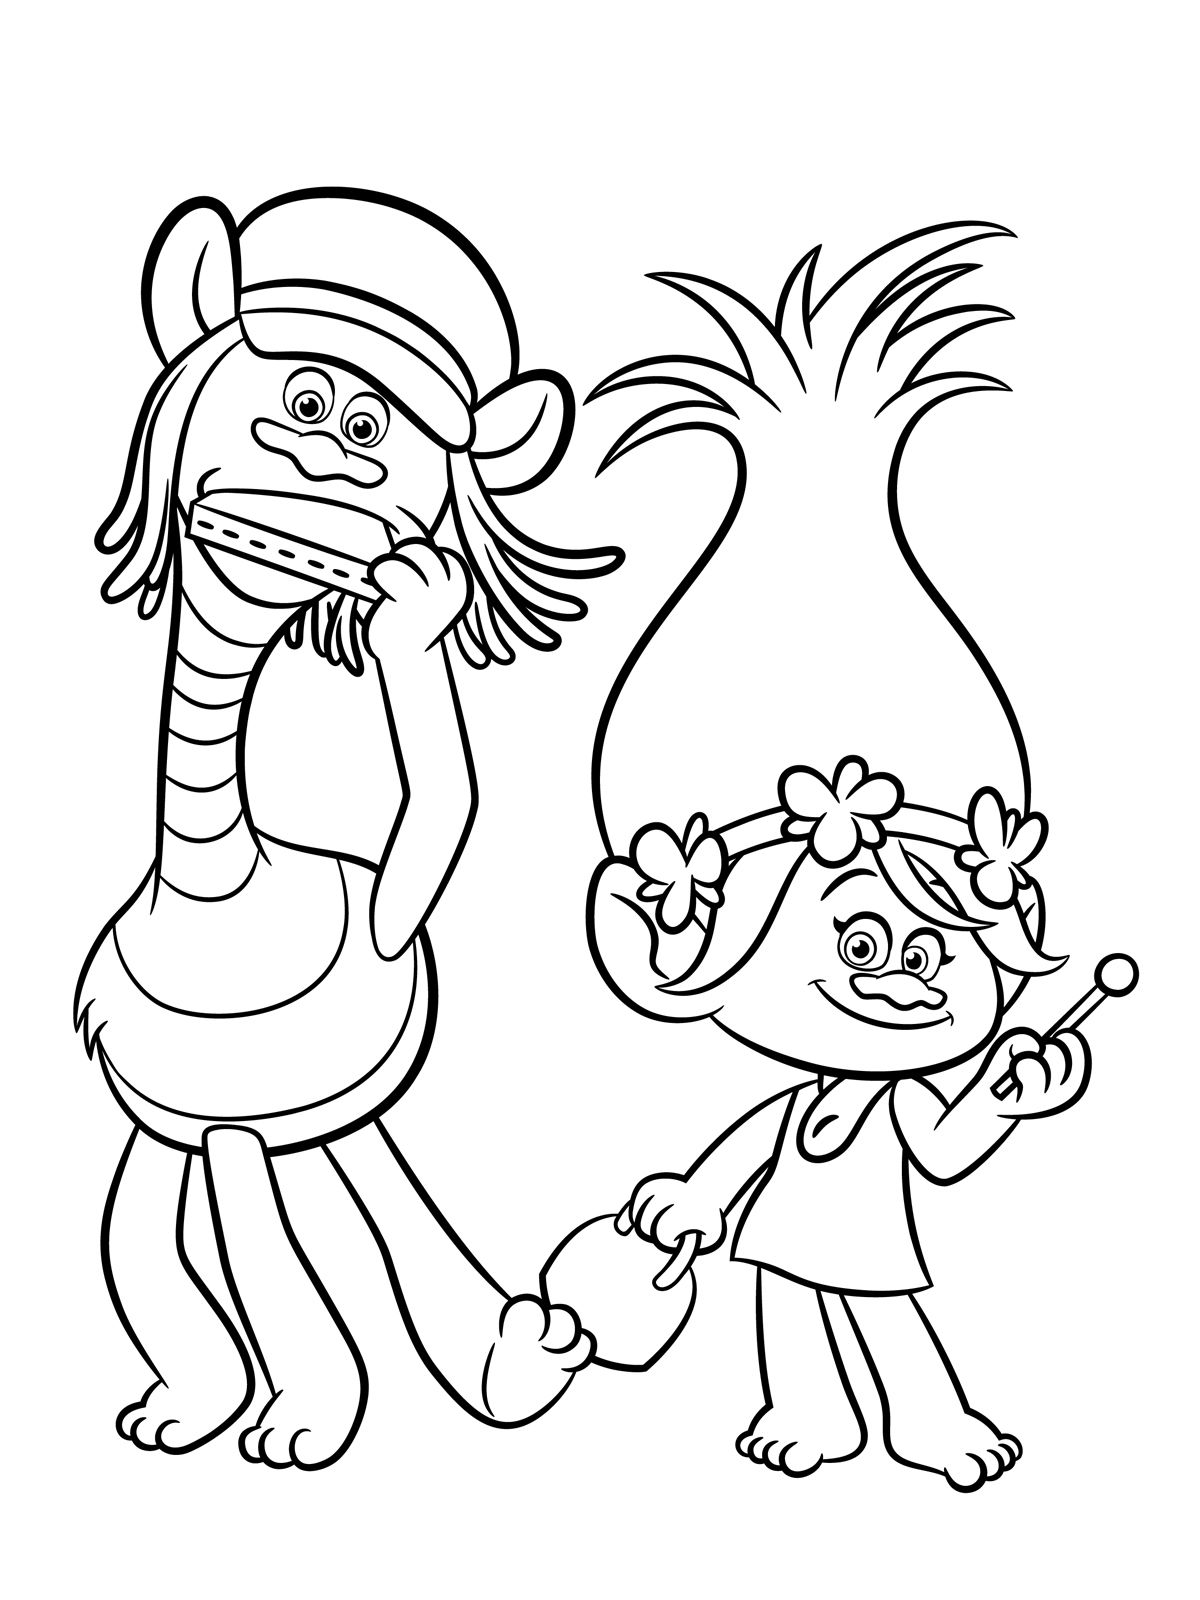 Kid Coloring Pages Disney / These Free Printable Disney Coloring Pages Are Full Of Family Fun